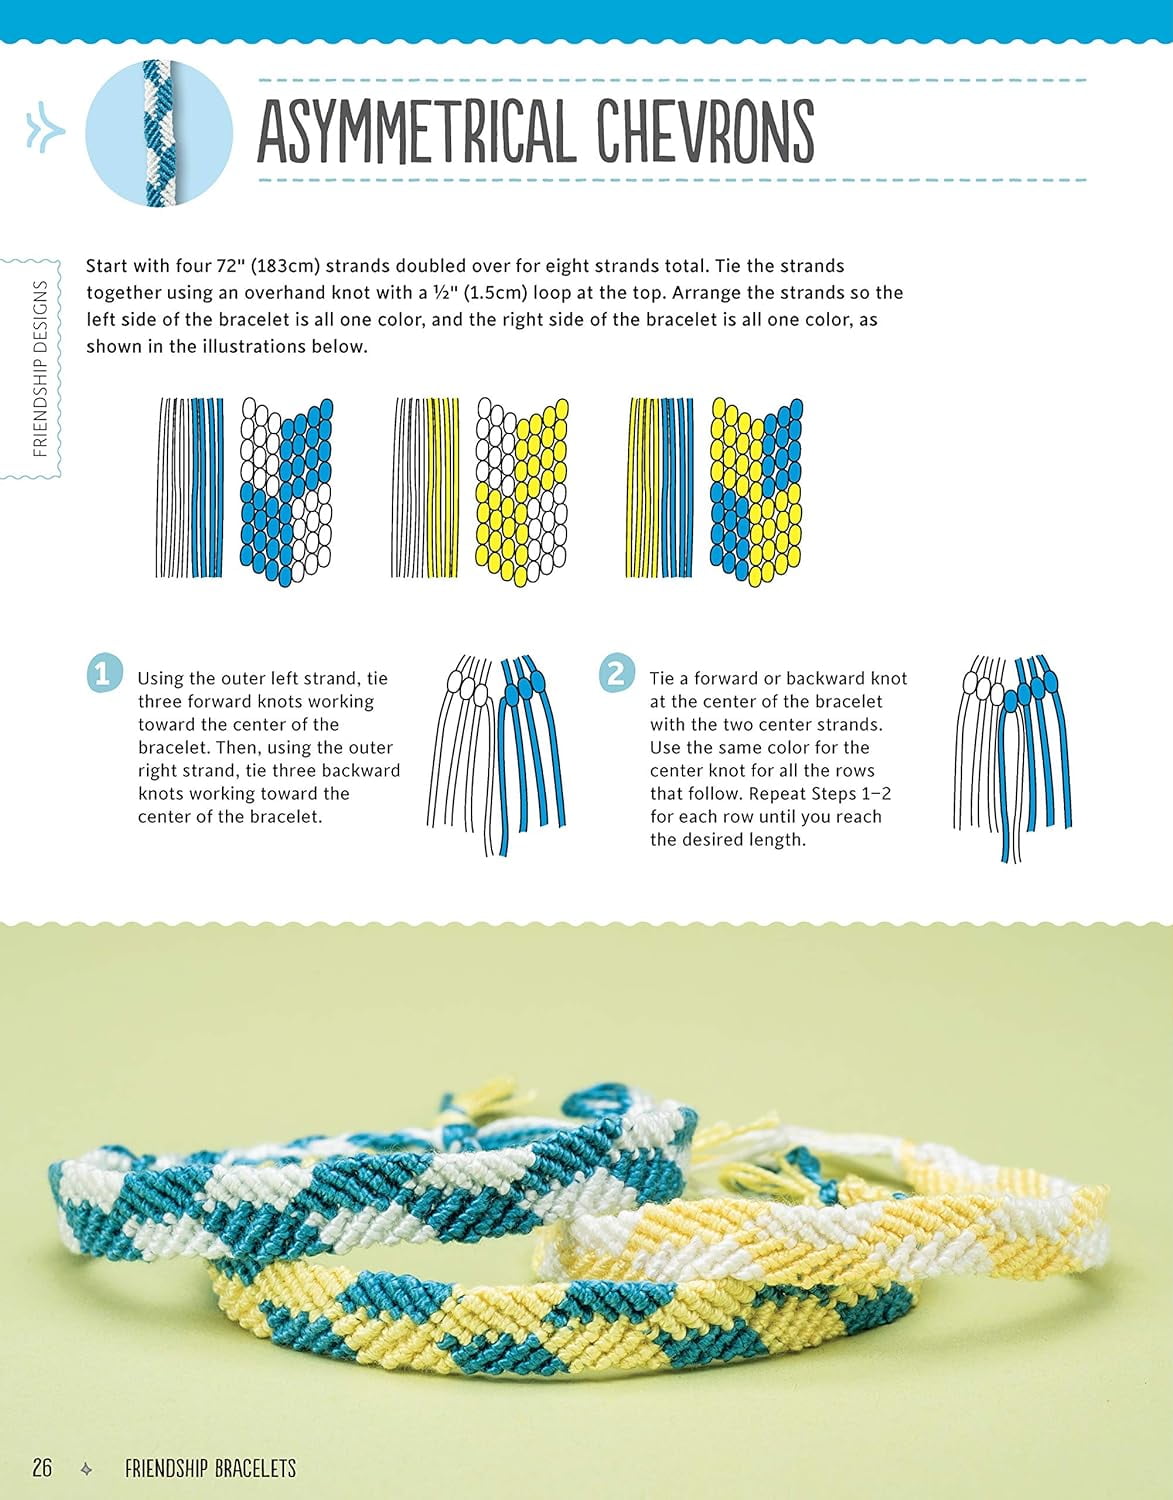 Easy Guide to make FRIENDSHIP BRACELETS: A Beginner's Guide to Creating Stylish  Friendship Bracelet Designs with Floss, Hemp, and Other Boho Chic Designs  Using Simple Techniques. eBook : Effertz, Suzanne : Amazon.in: